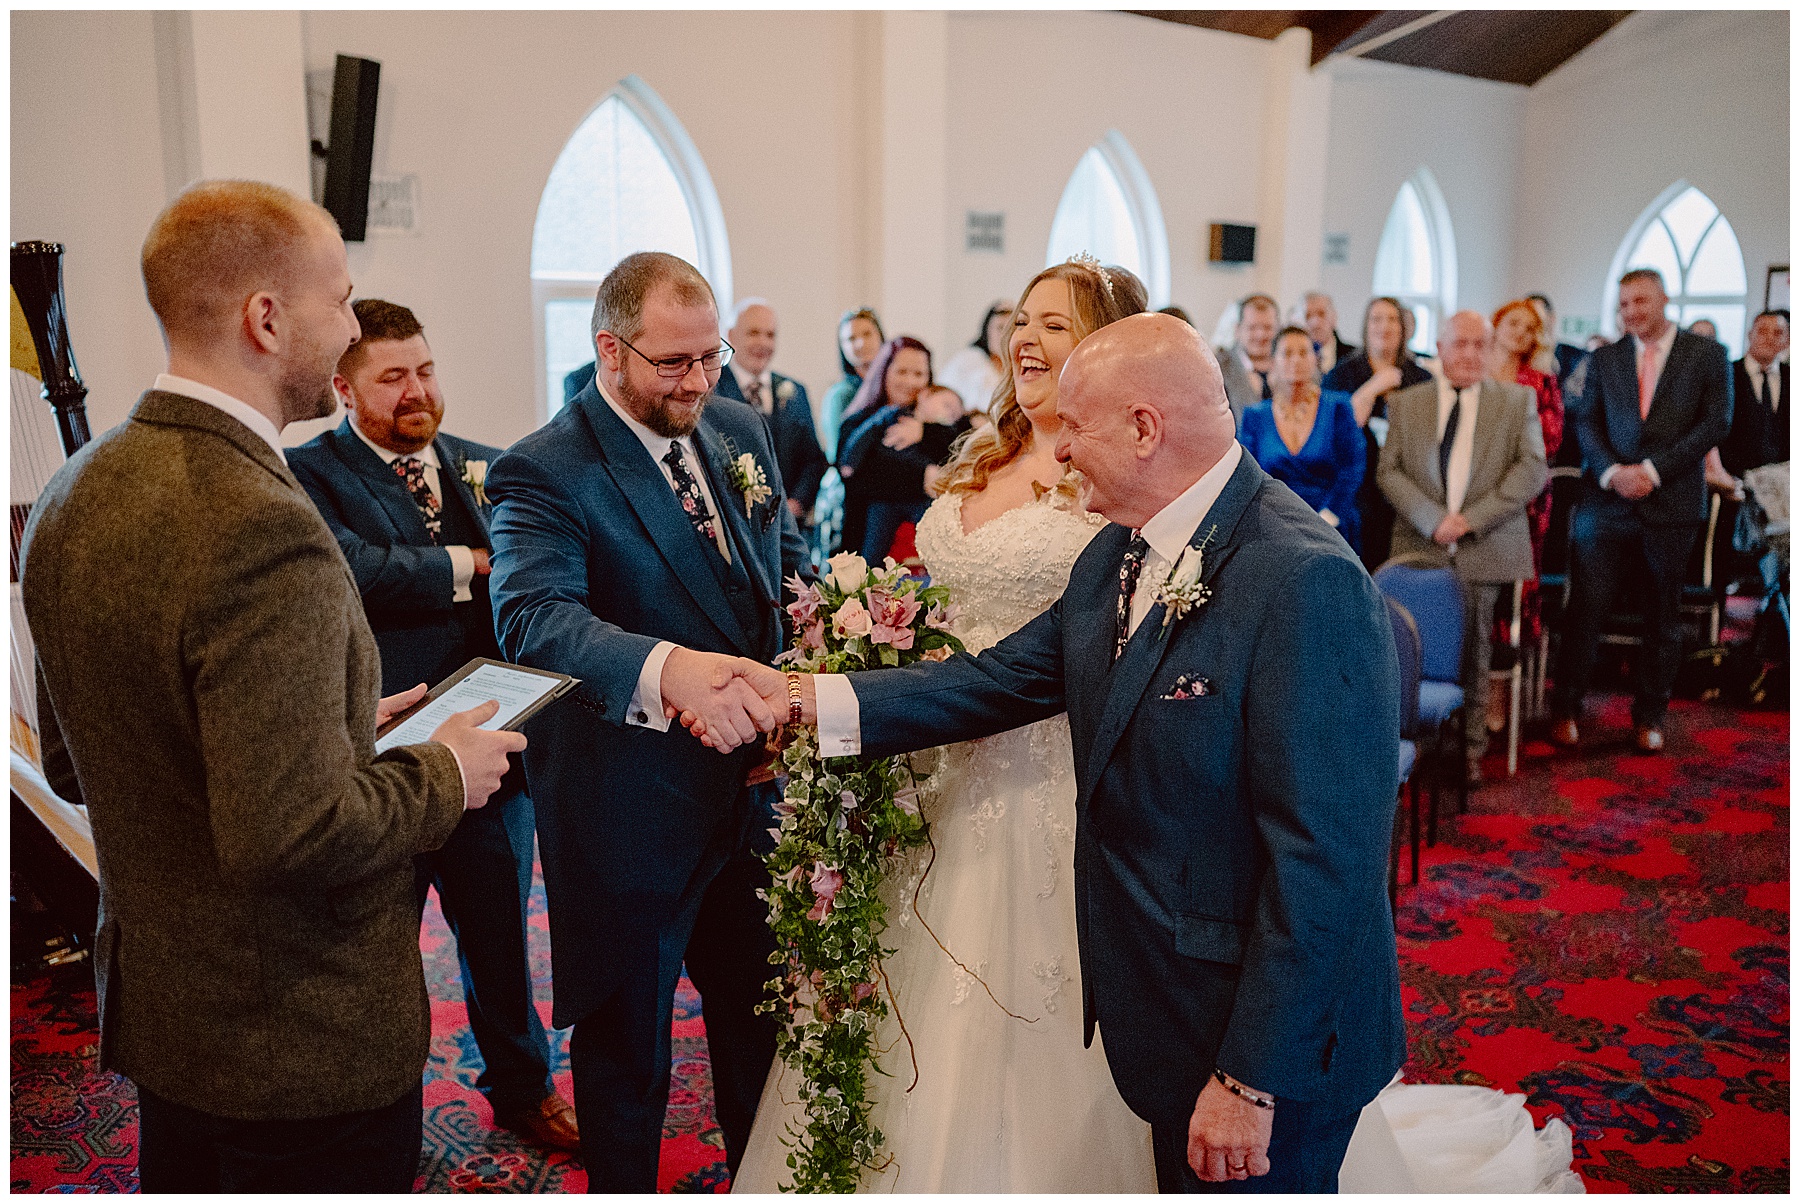 Groom Shaking Hands With Father of Bride